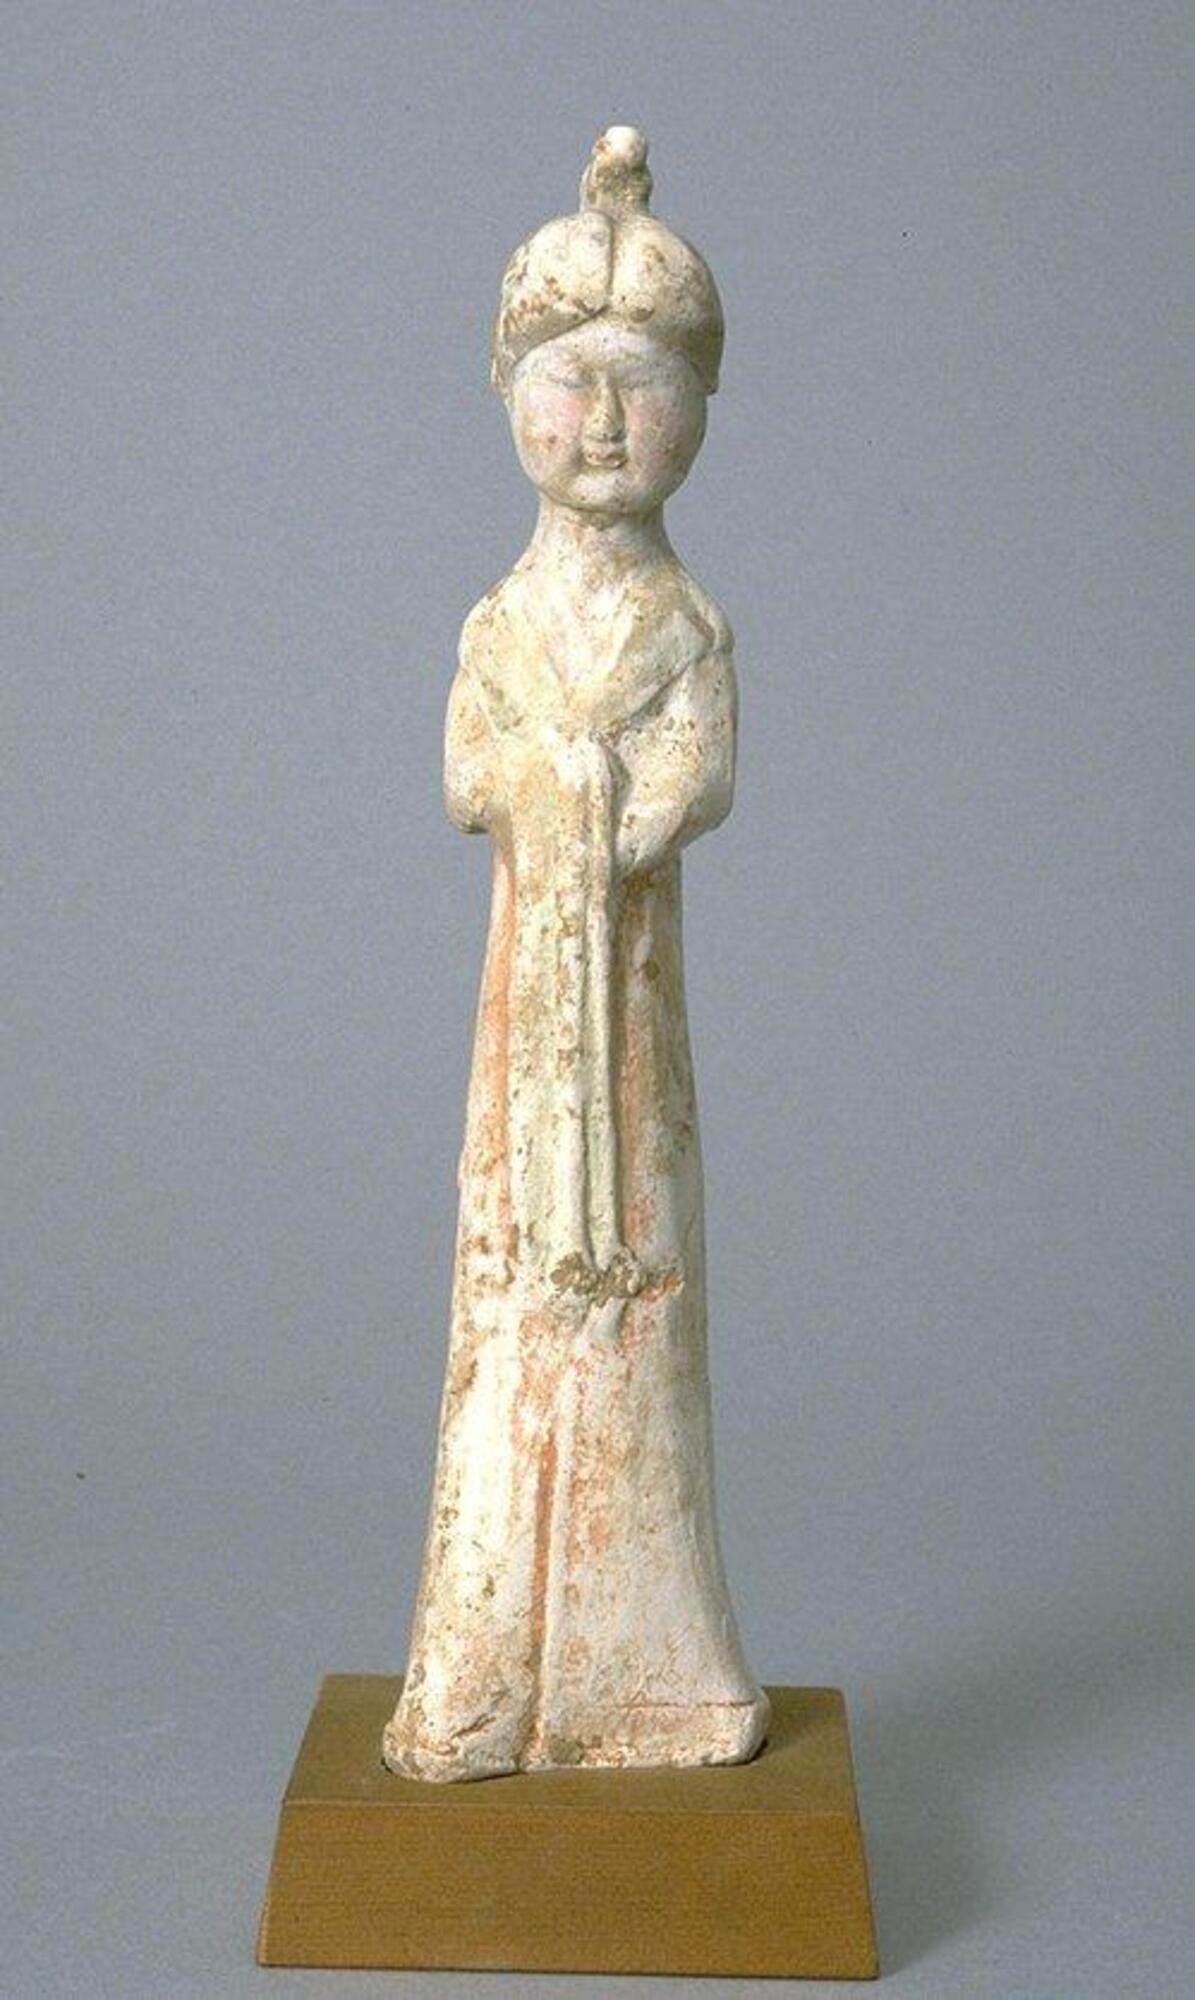 An earthenware female figure, thin and tall, standing with arms clasped in front of the body, wearing long robes with a wide collar, tied at the waist, with the fabric of her long sleeves folded over her hands. She has a round face with petite details, her hair is parted down the middle and tied up in a high chignon. The sculpture is covered in polychrome mineral pigments.